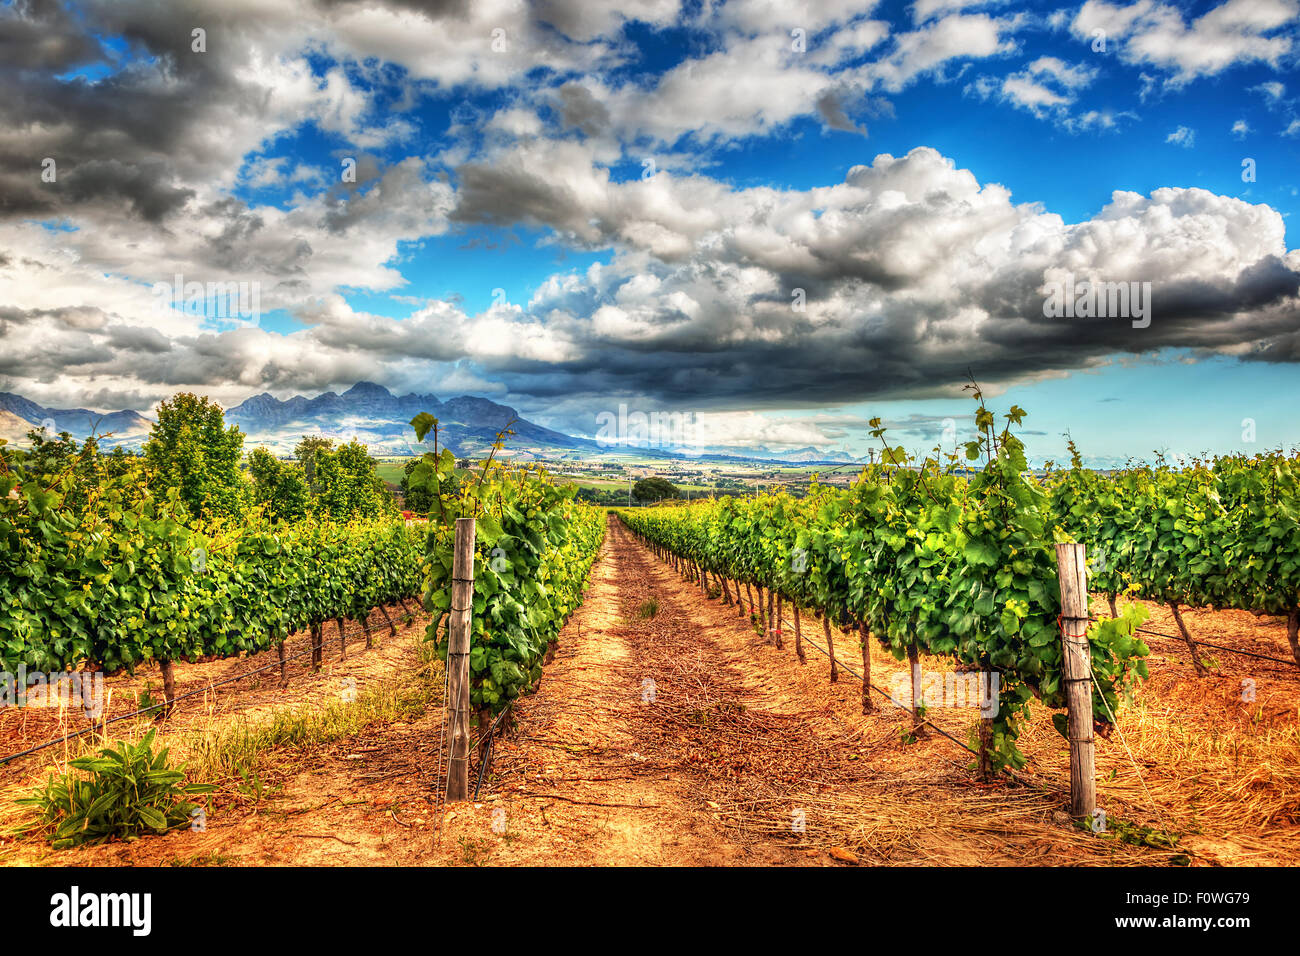 Grape fields landscape, winery garden with blue sky, beautiful agricultural scene on harvest season, grapes valley at fall Stock Photo